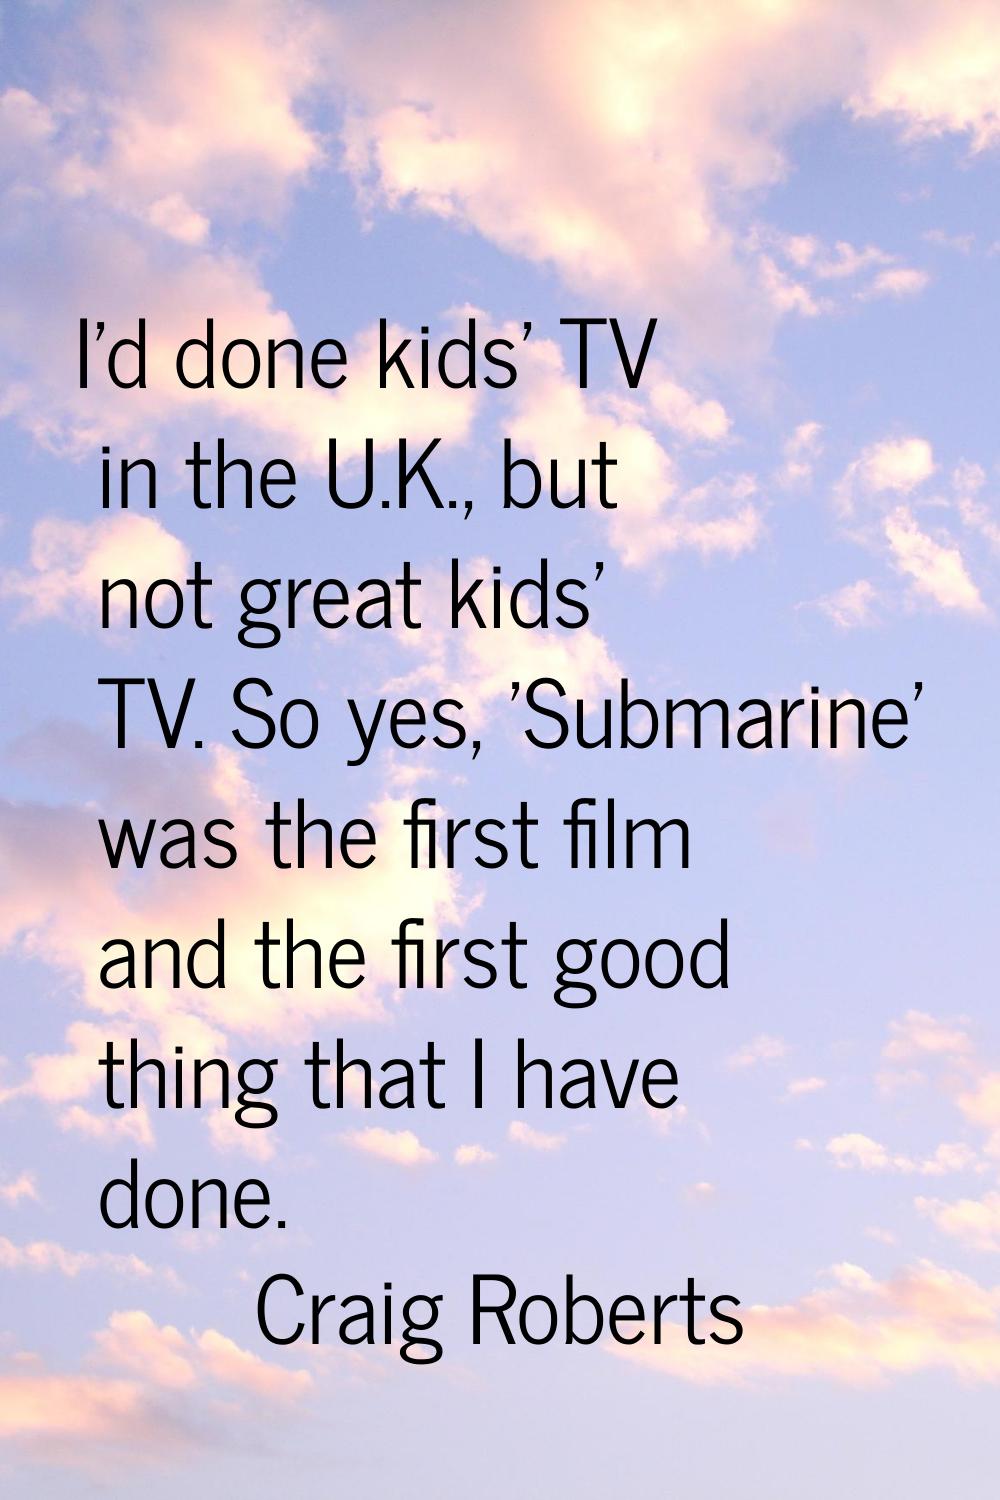 I'd done kids' TV in the U.K., but not great kids' TV. So yes, 'Submarine' was the first film and t